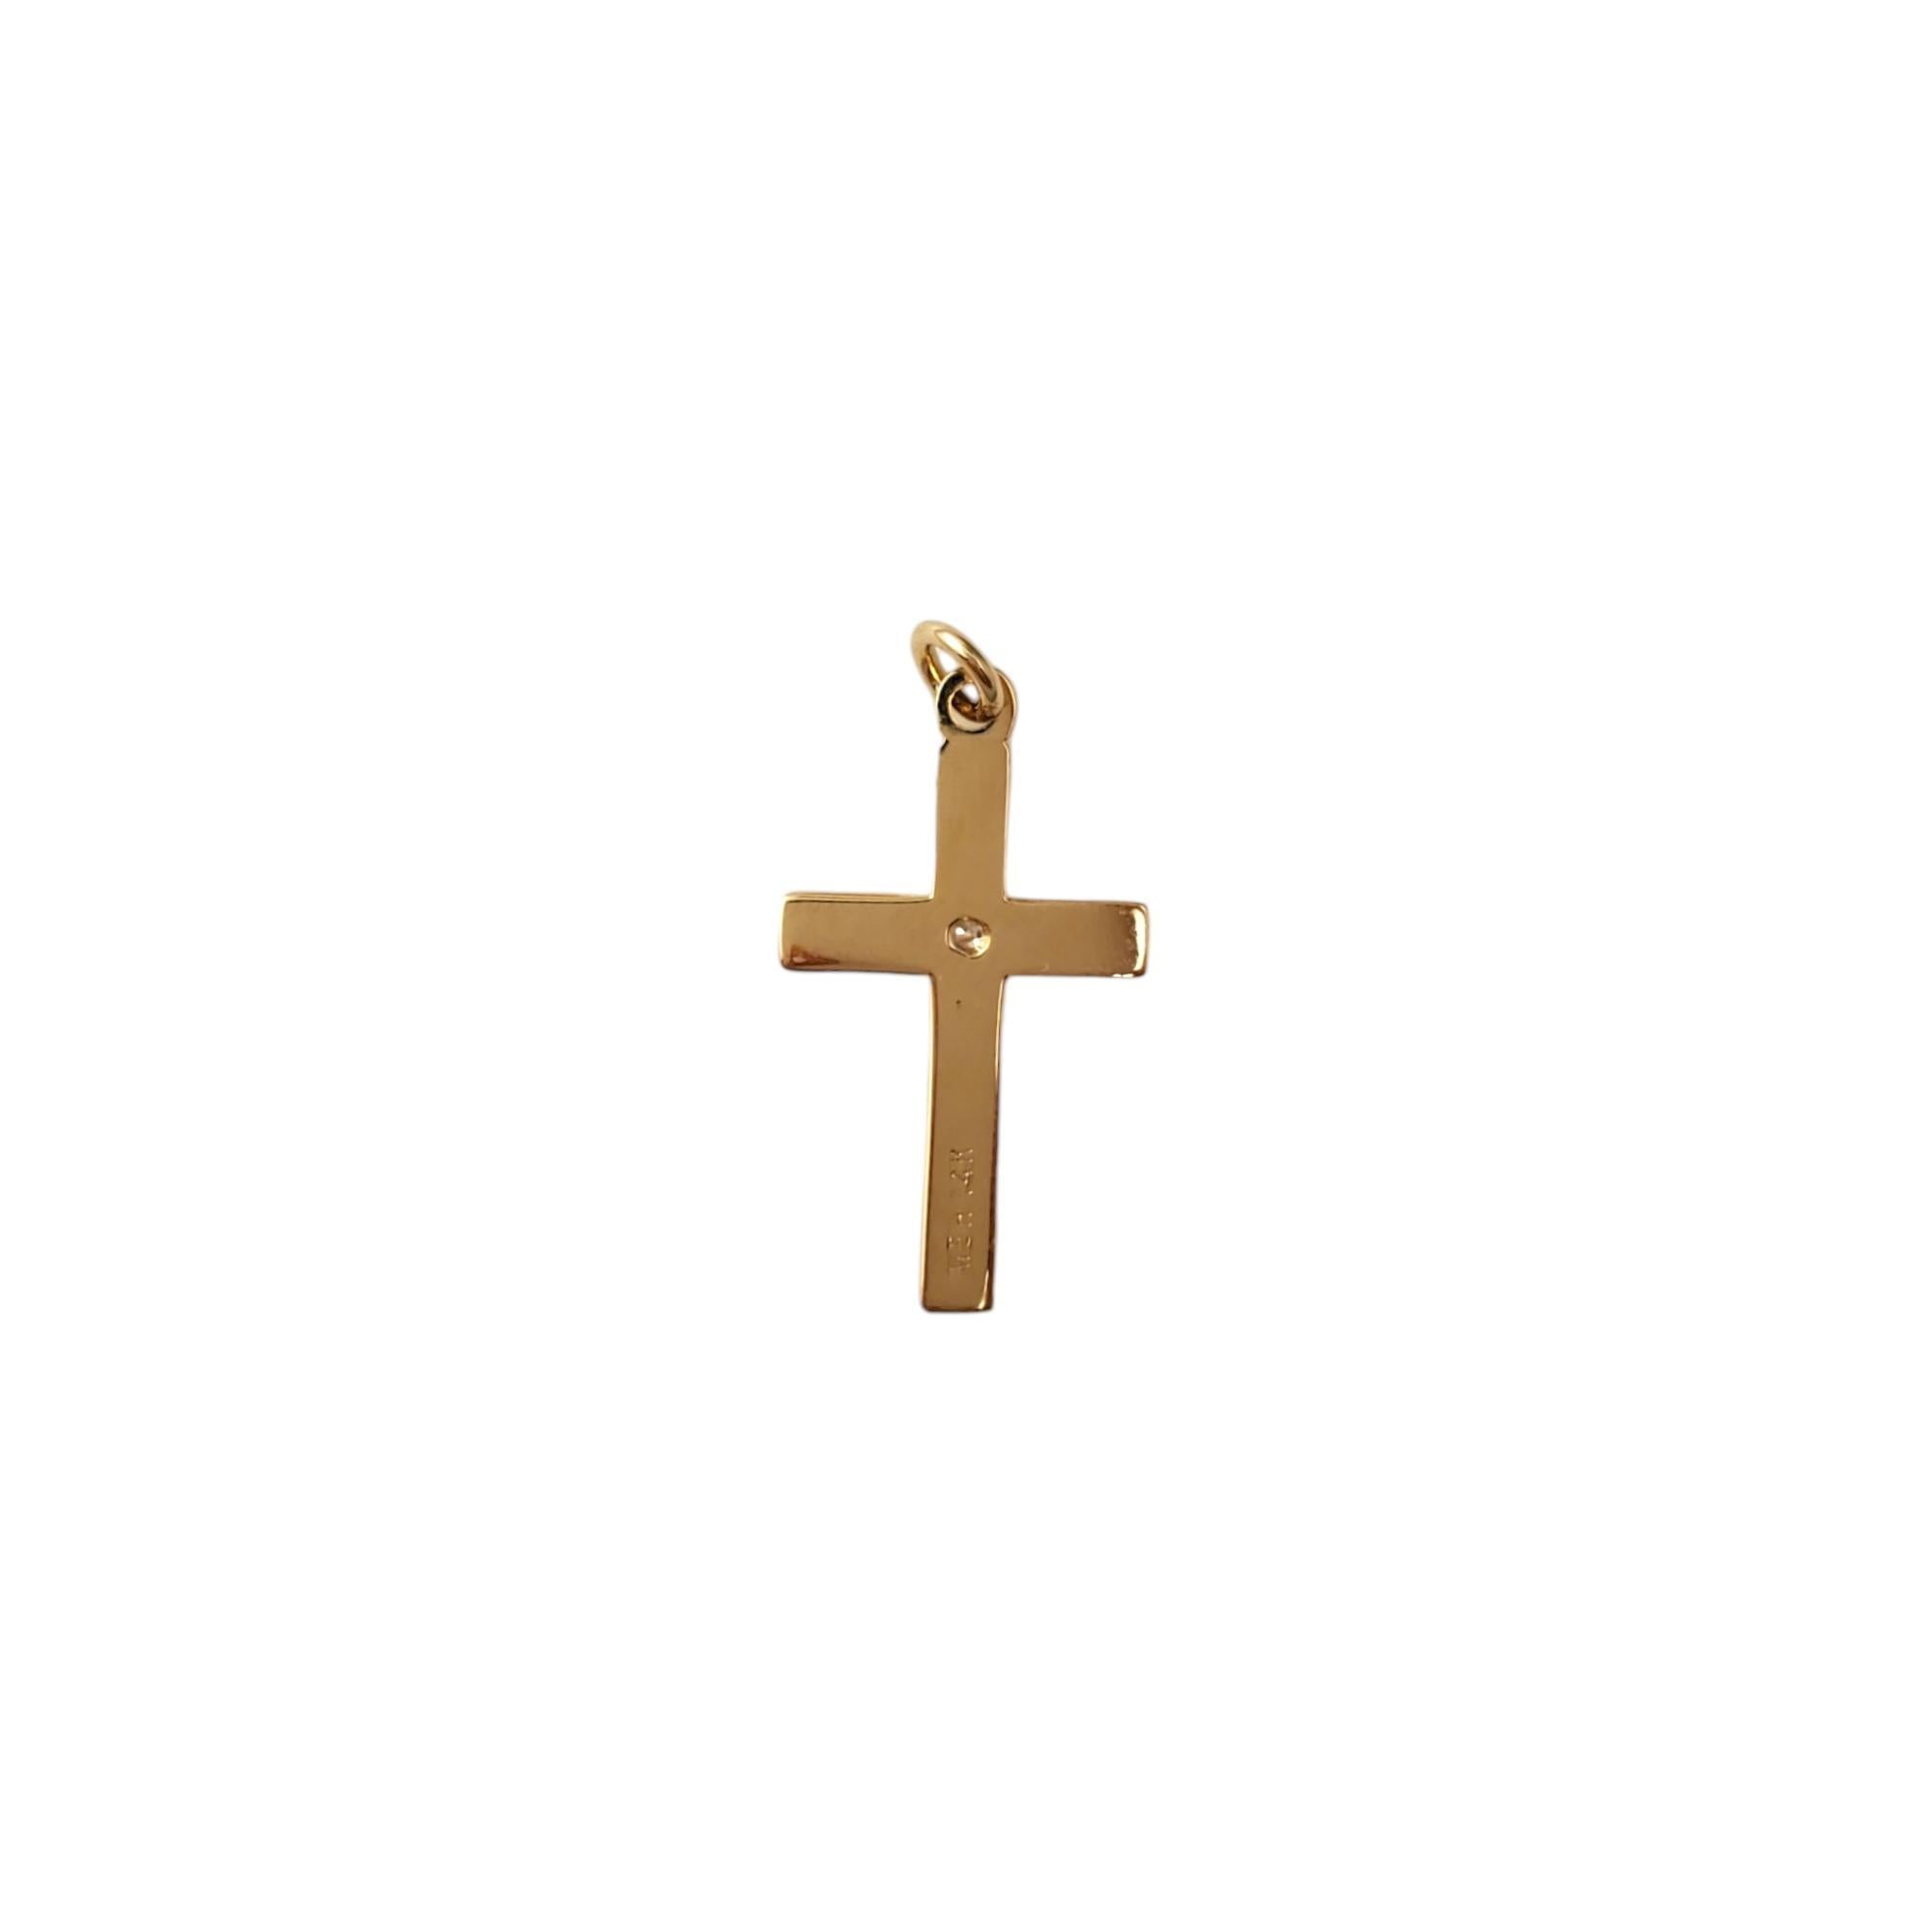 Vintage 14K Yellow Gold Cross Pendant with Diamond -

This gorgeous cross pendant features 1 single cut diamond.

Approximate total diamond weight:  .005cts.

Diamond color:  H

Diamond clarity:  I1

Size:  22.4 mm  x  13.1 mm X 1.0 mm 

Weight: 